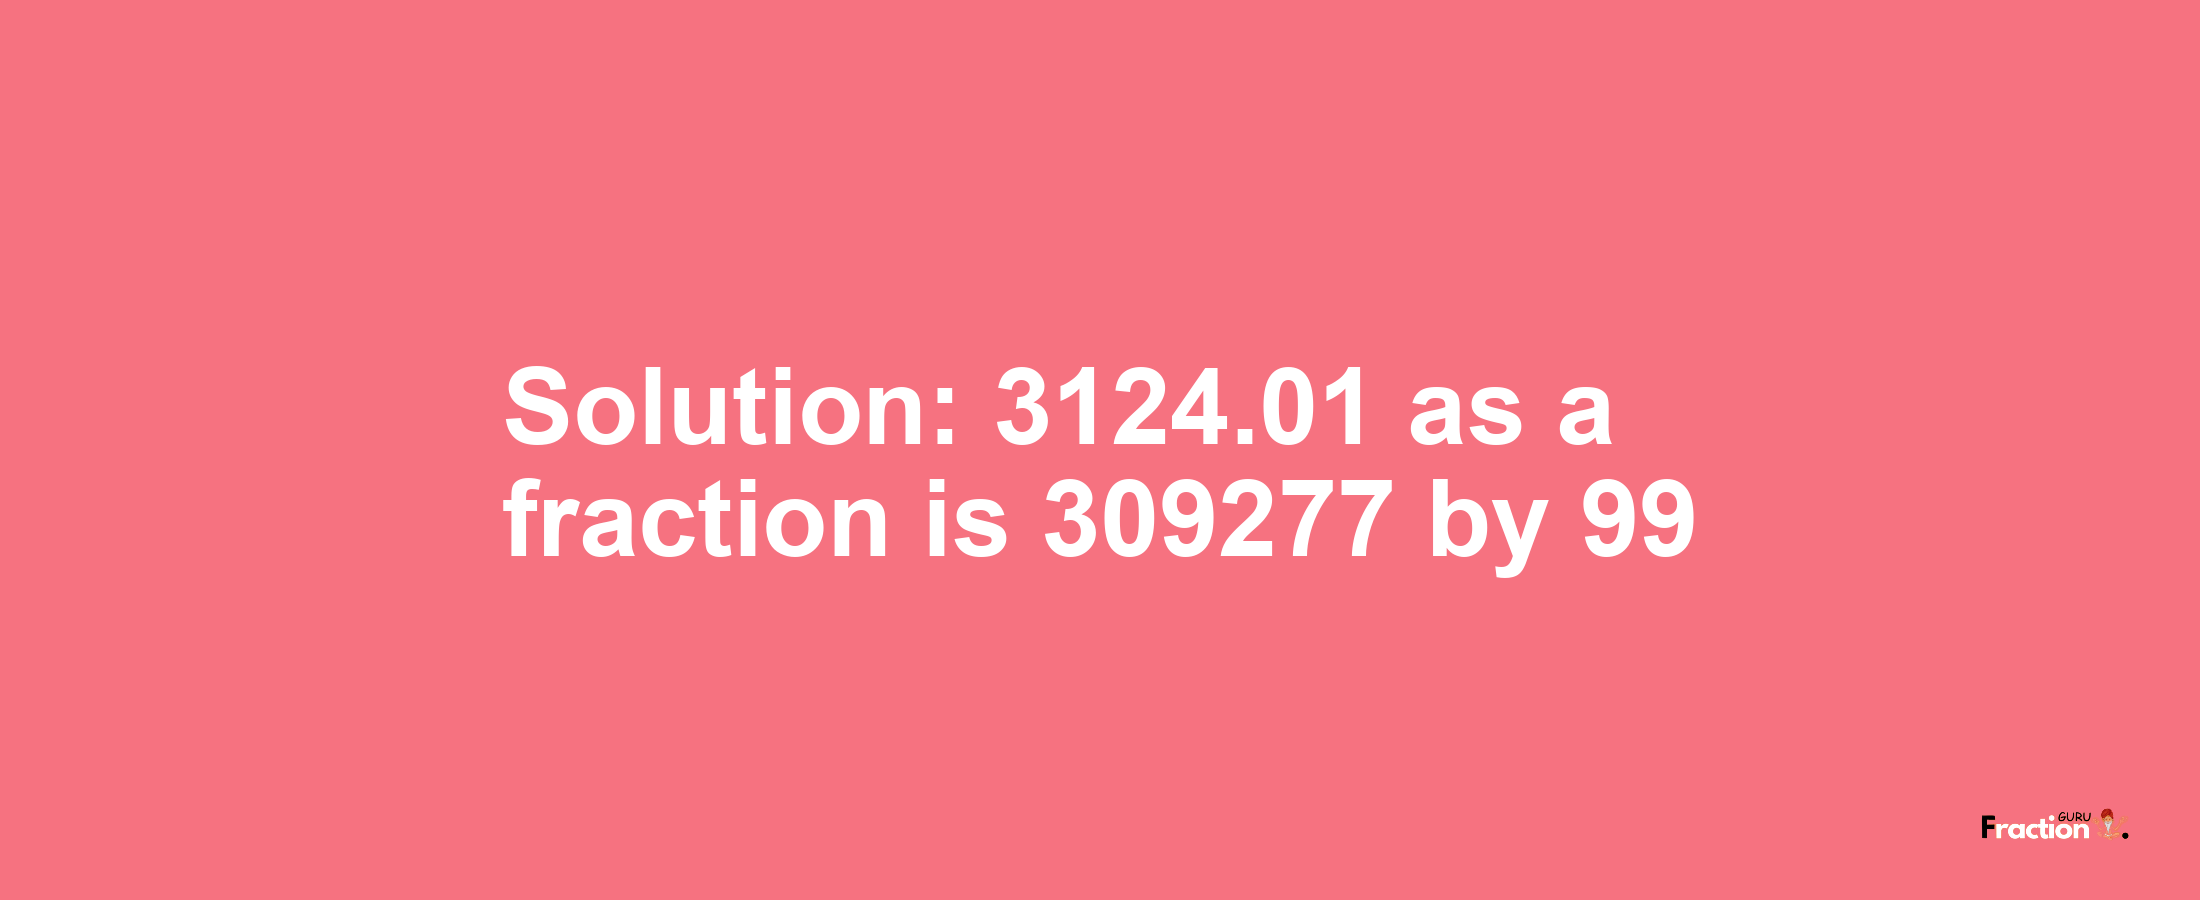 Solution:3124.01 as a fraction is 309277/99